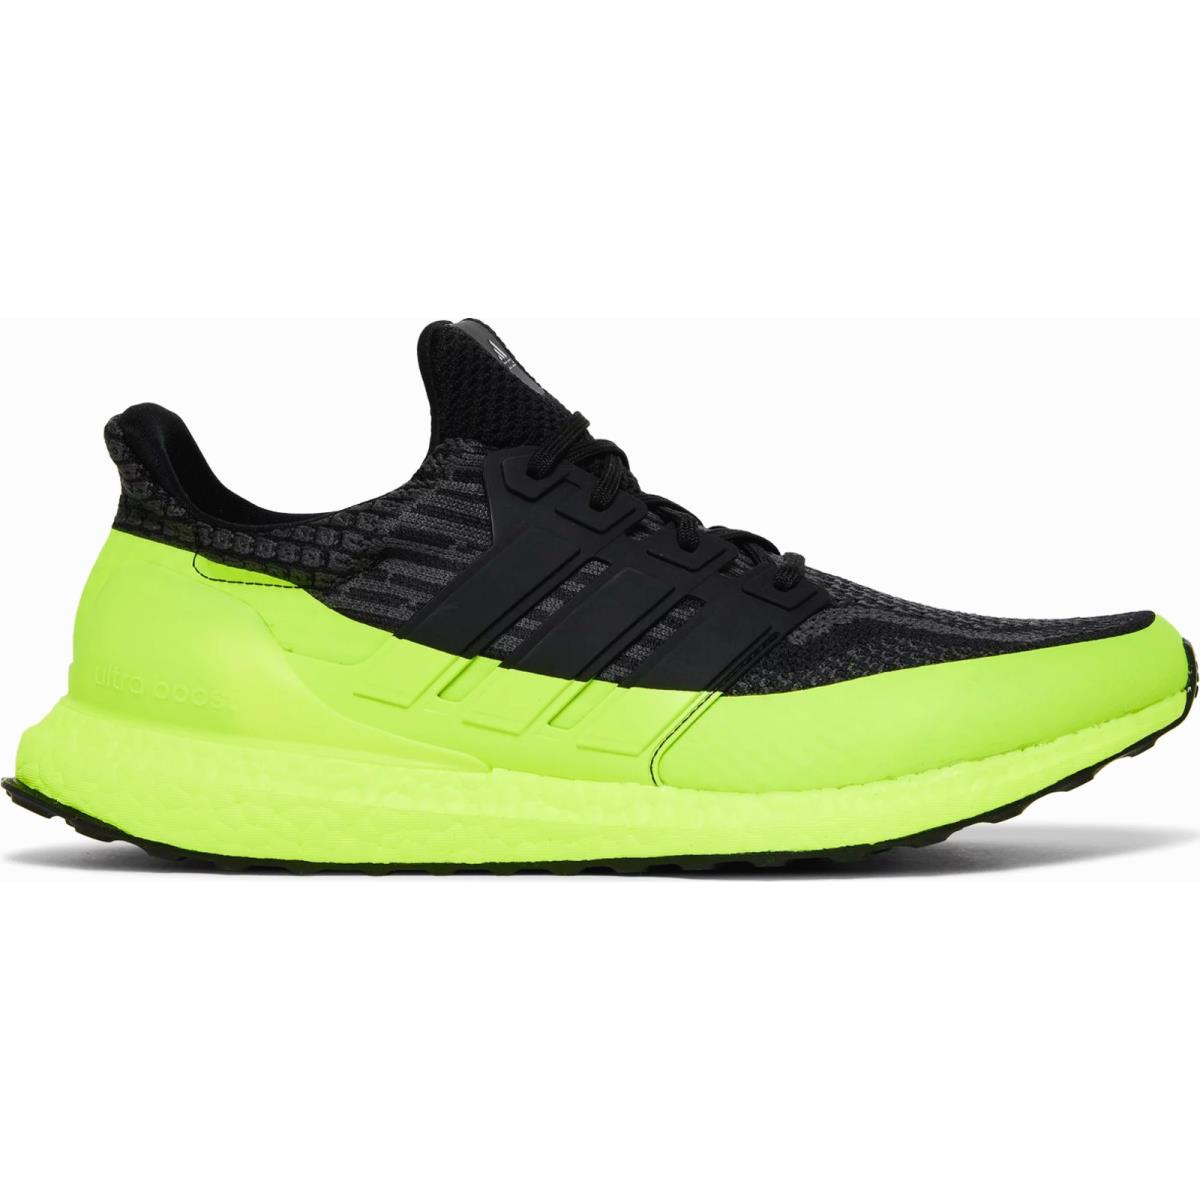 Adidas Ultraboost 5.0 Dna Black Solar Yellow Volt Neon Athletic Running Shoes